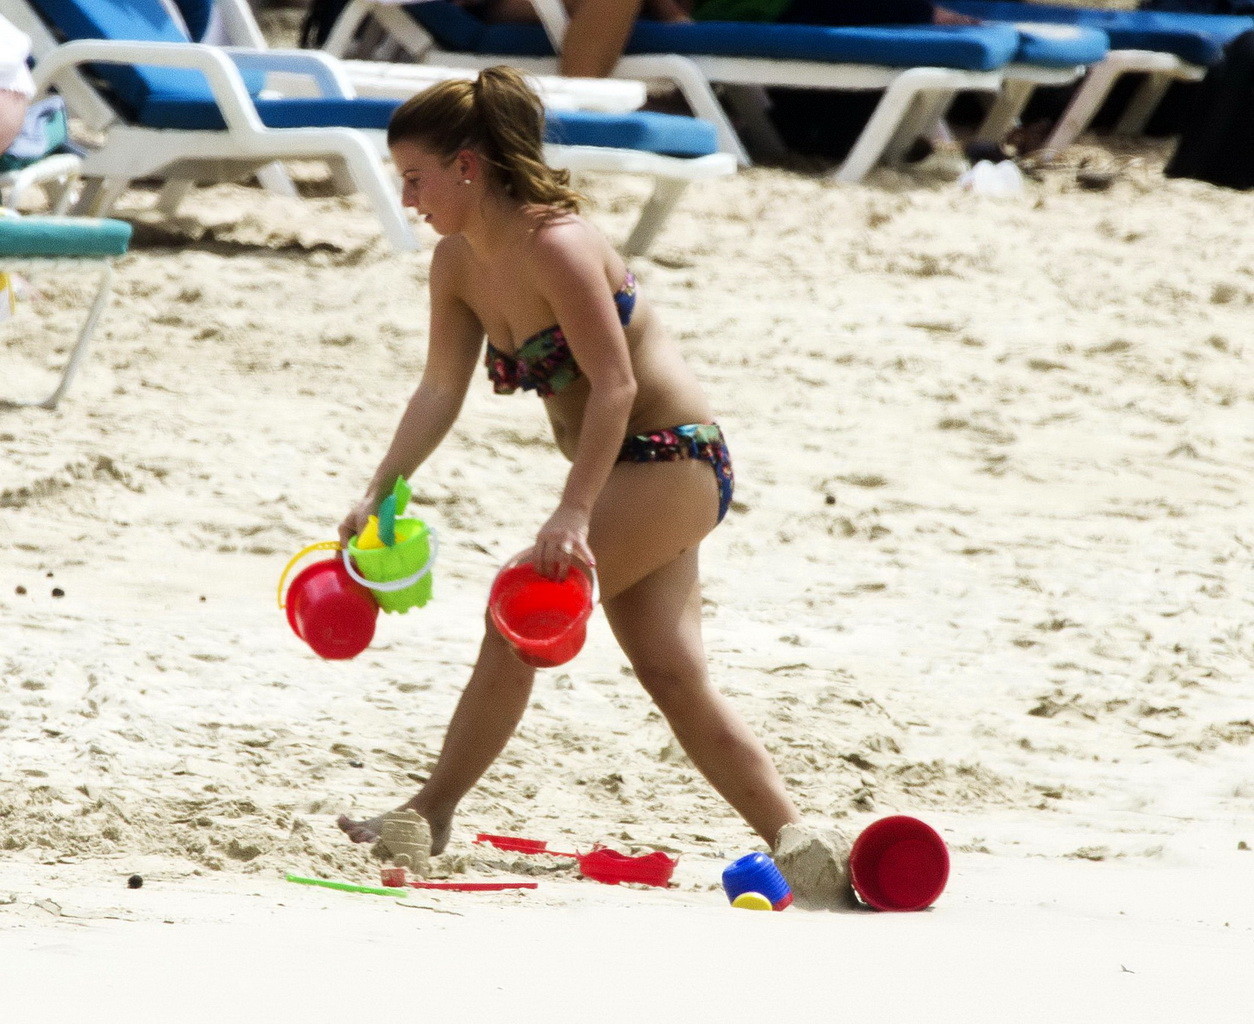 Coleen Rooney showing off her plump bikini body on a beach in Barbados #75216068